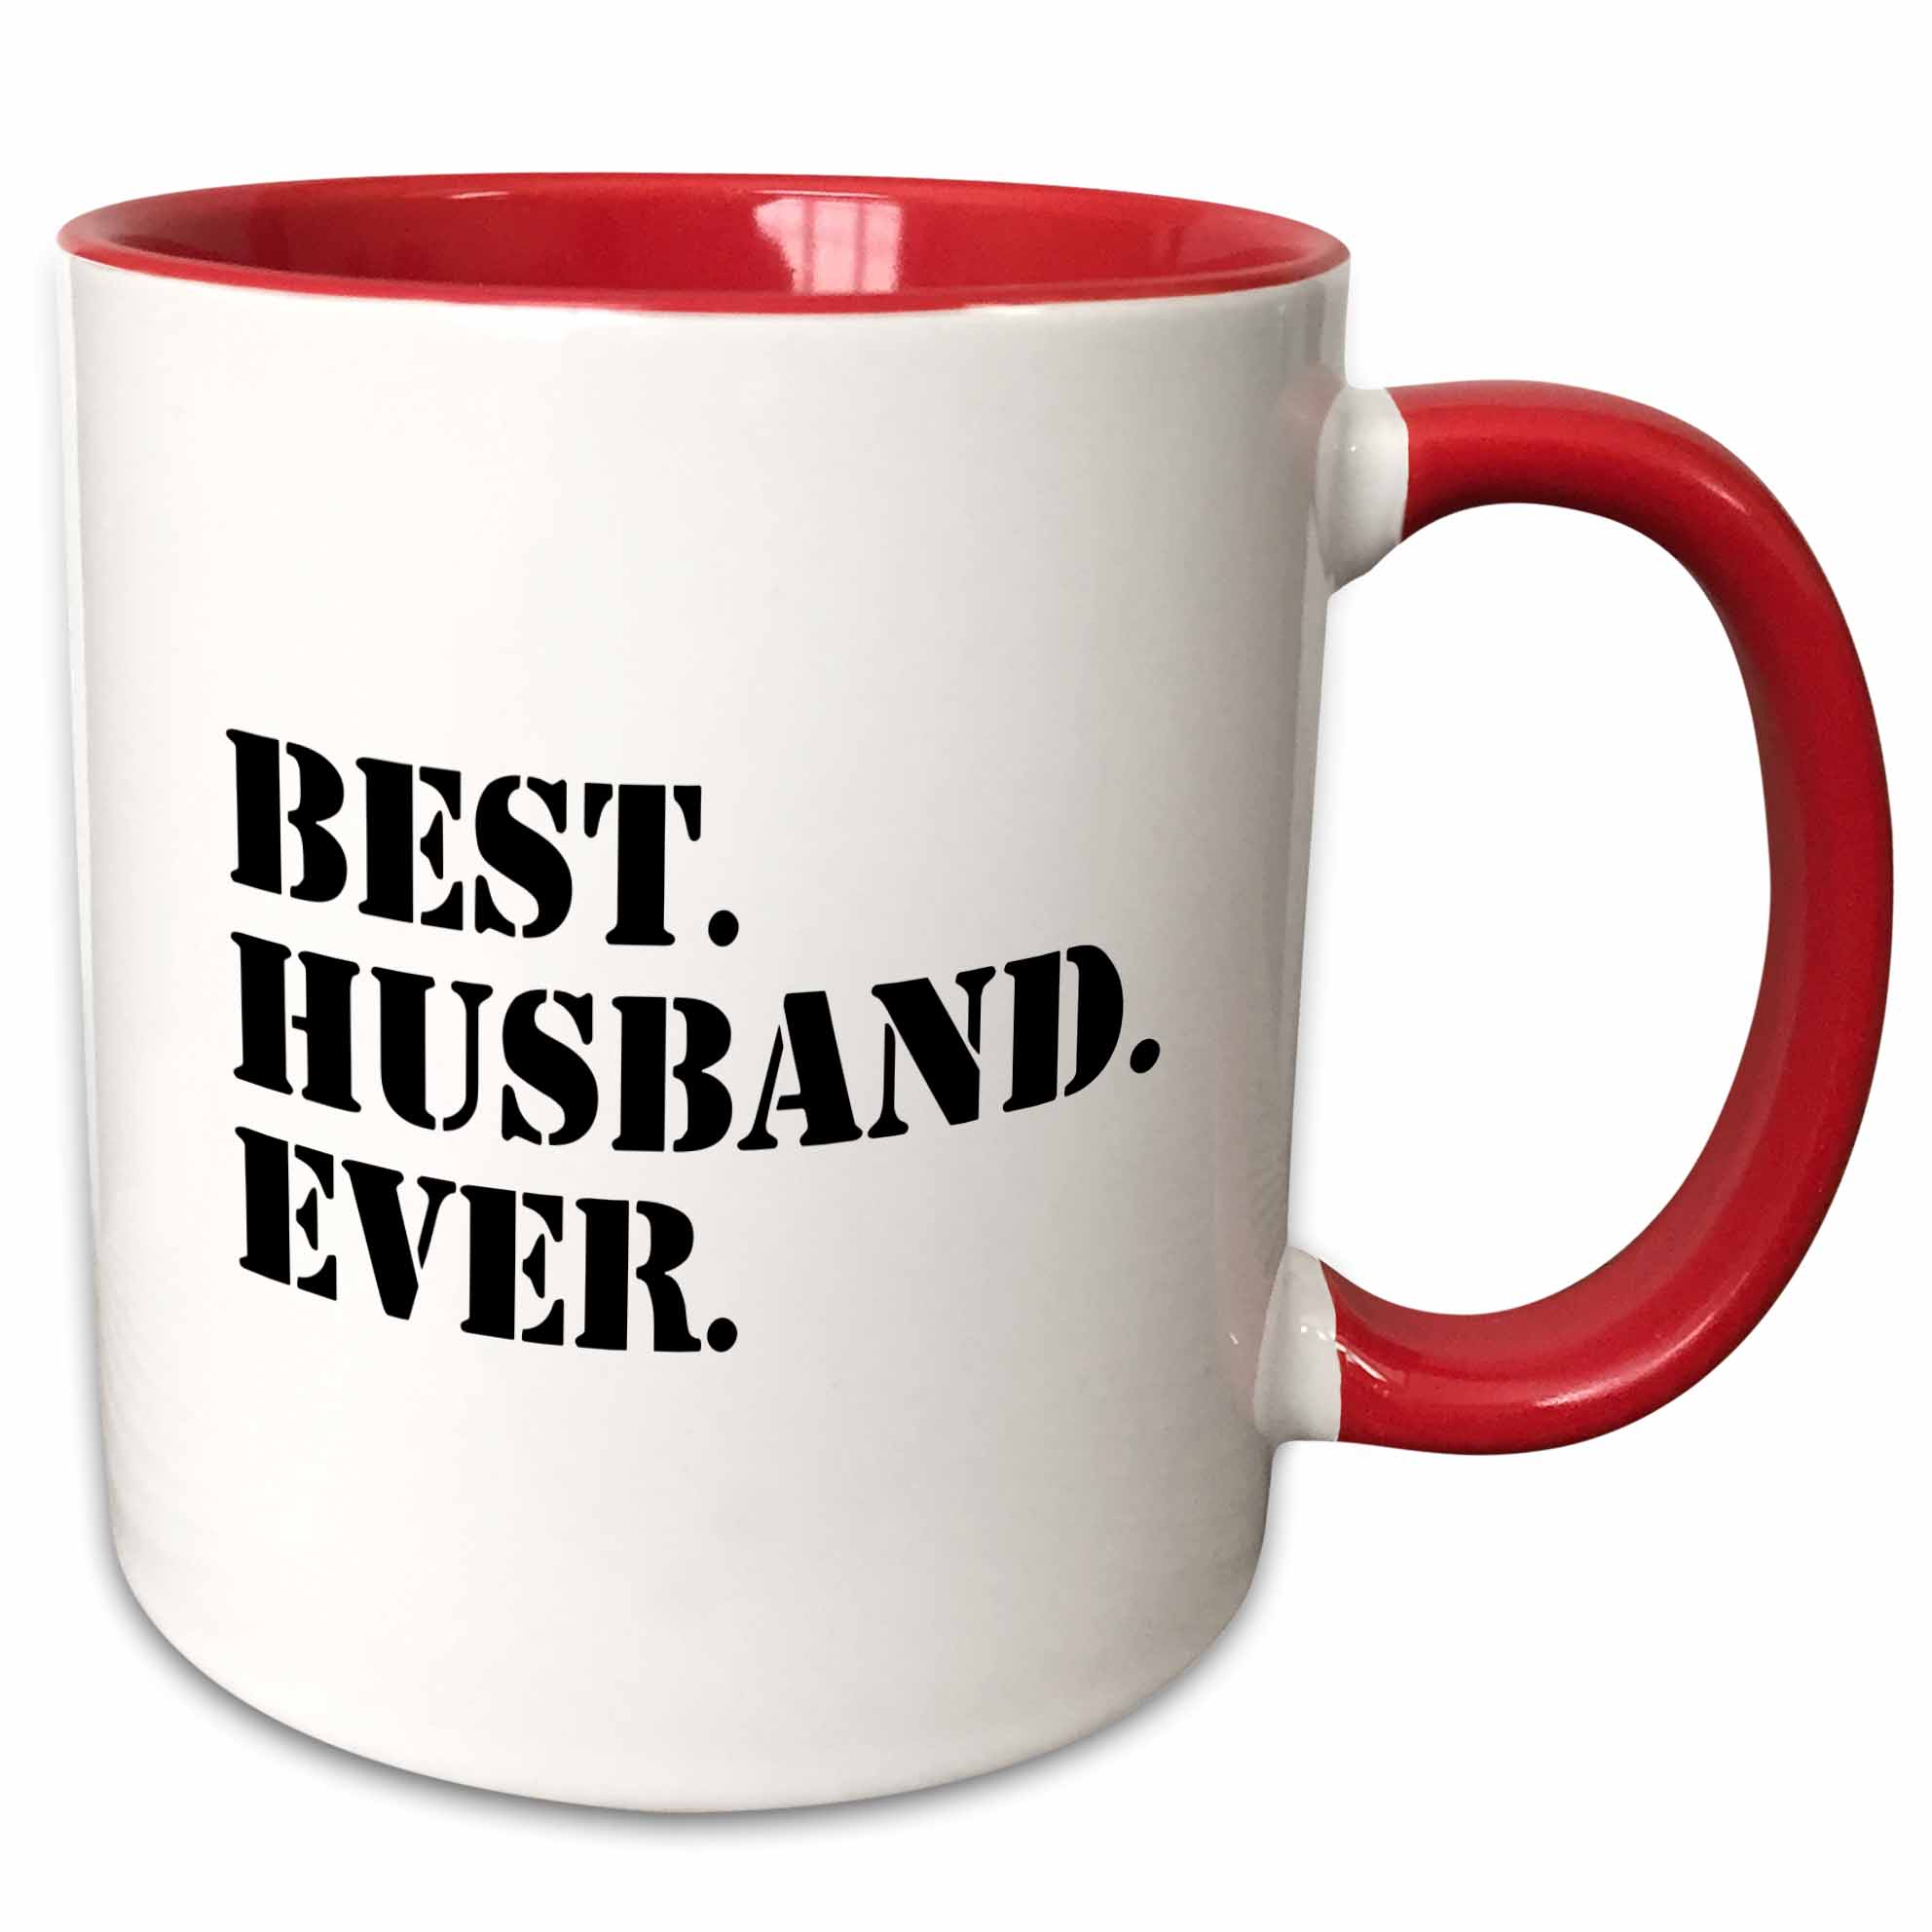 Best Husband Ever - Romantic love gift for him, Anniversary, Valentines Day 11oz Two-Tone Red Mug mug-203246-5 - image 1 of 3